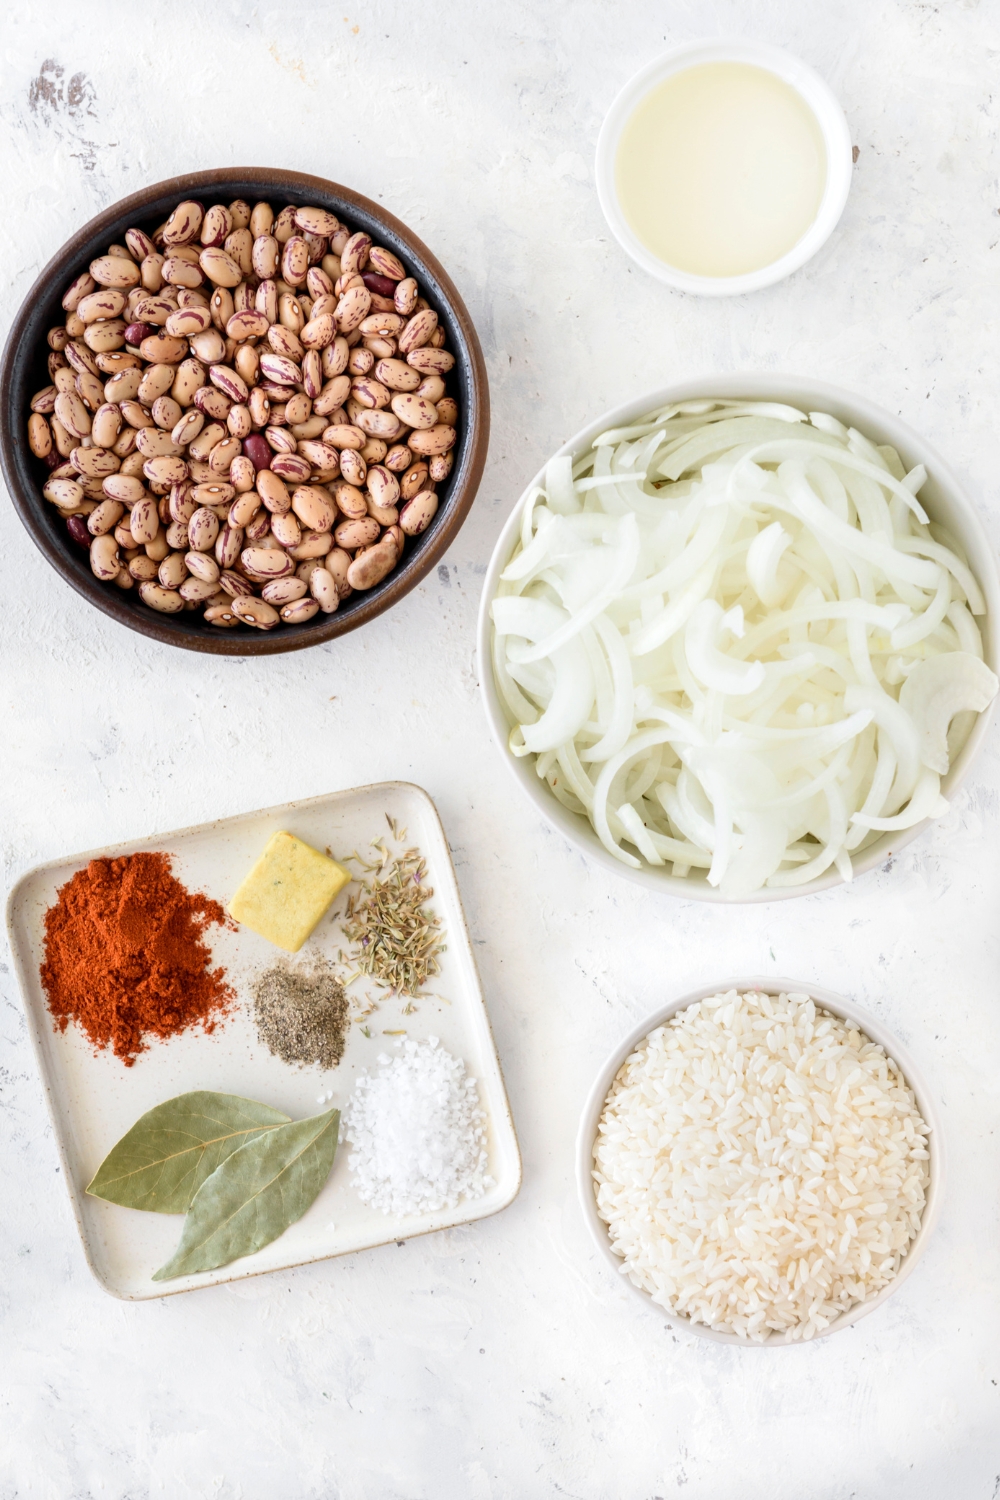 An assortment of ingredients including bowls of pinto beans, sliced onions, dried rice, and a plate of seasonings.